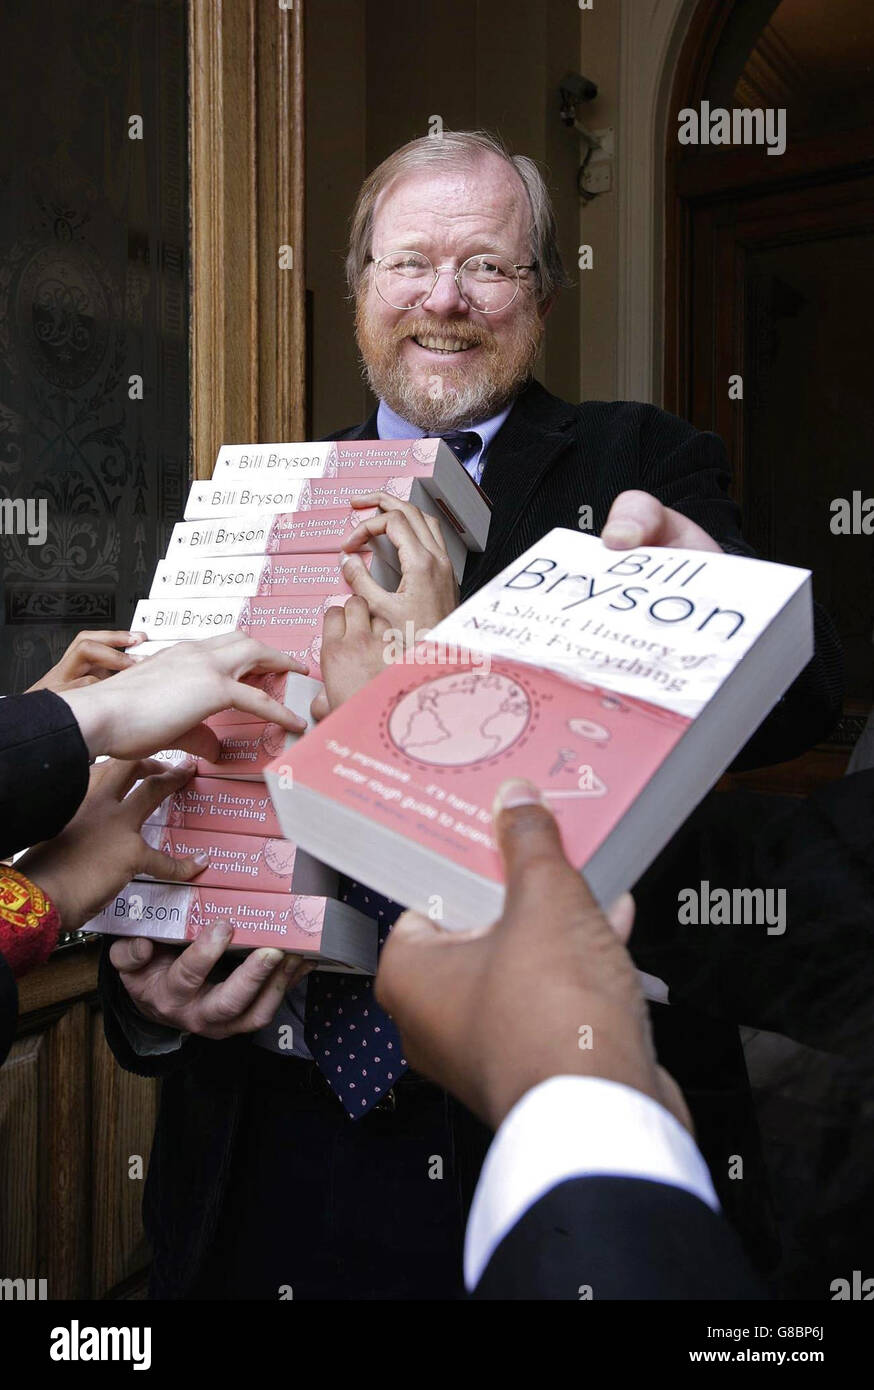 Bill Bryson - A Short History of Nearly Everything - Schools Free Copy  Stock Photo - Alamy